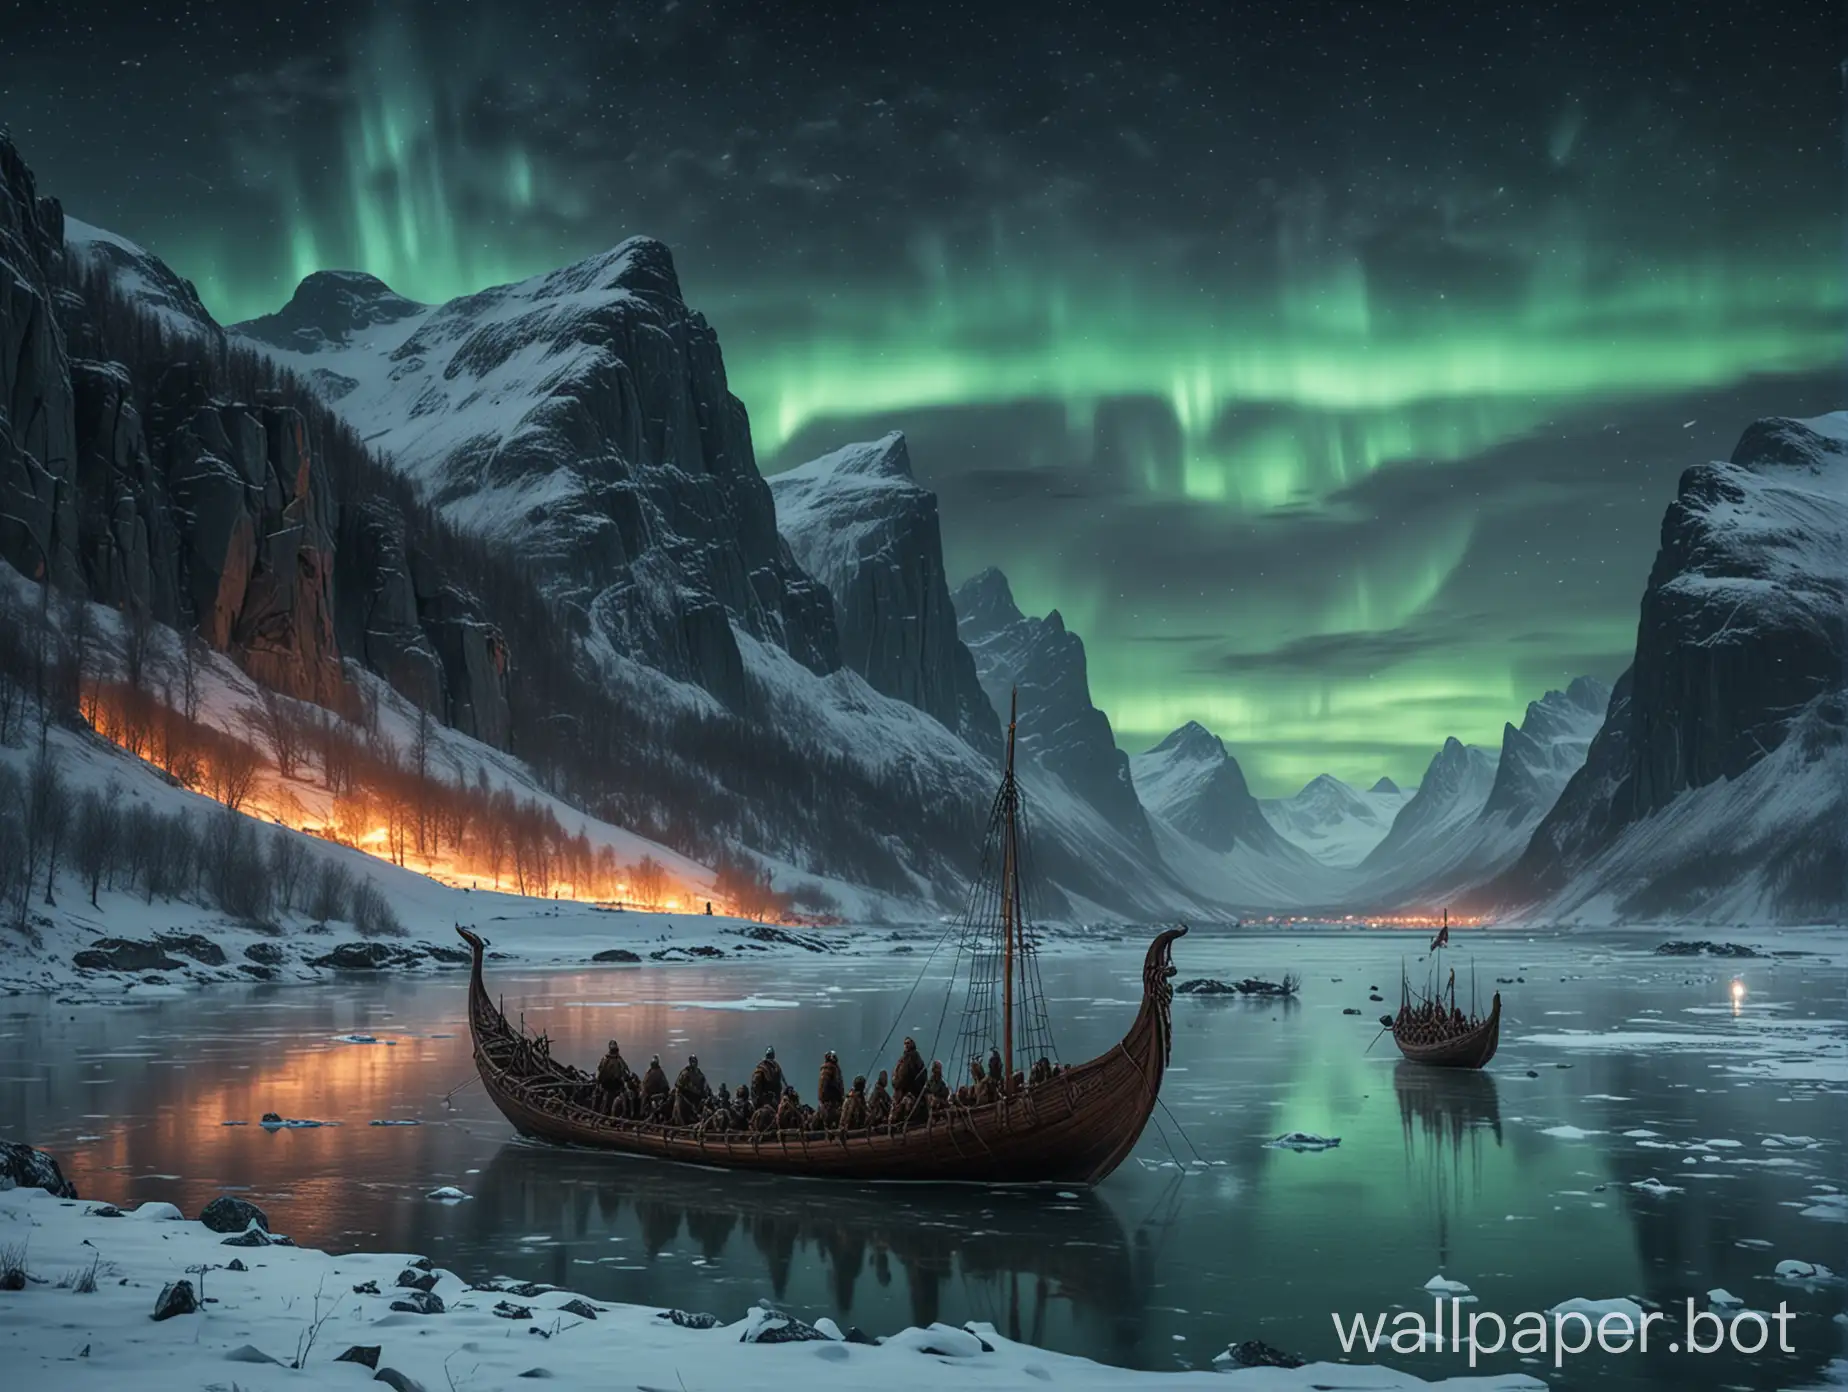 Very large viking ships carrying many viking soldiers in a frozen bay surrounded by massive mountains covered in snow and barren trees with a few crows flying around the night sky, with a breath taking veiw of the northern lights